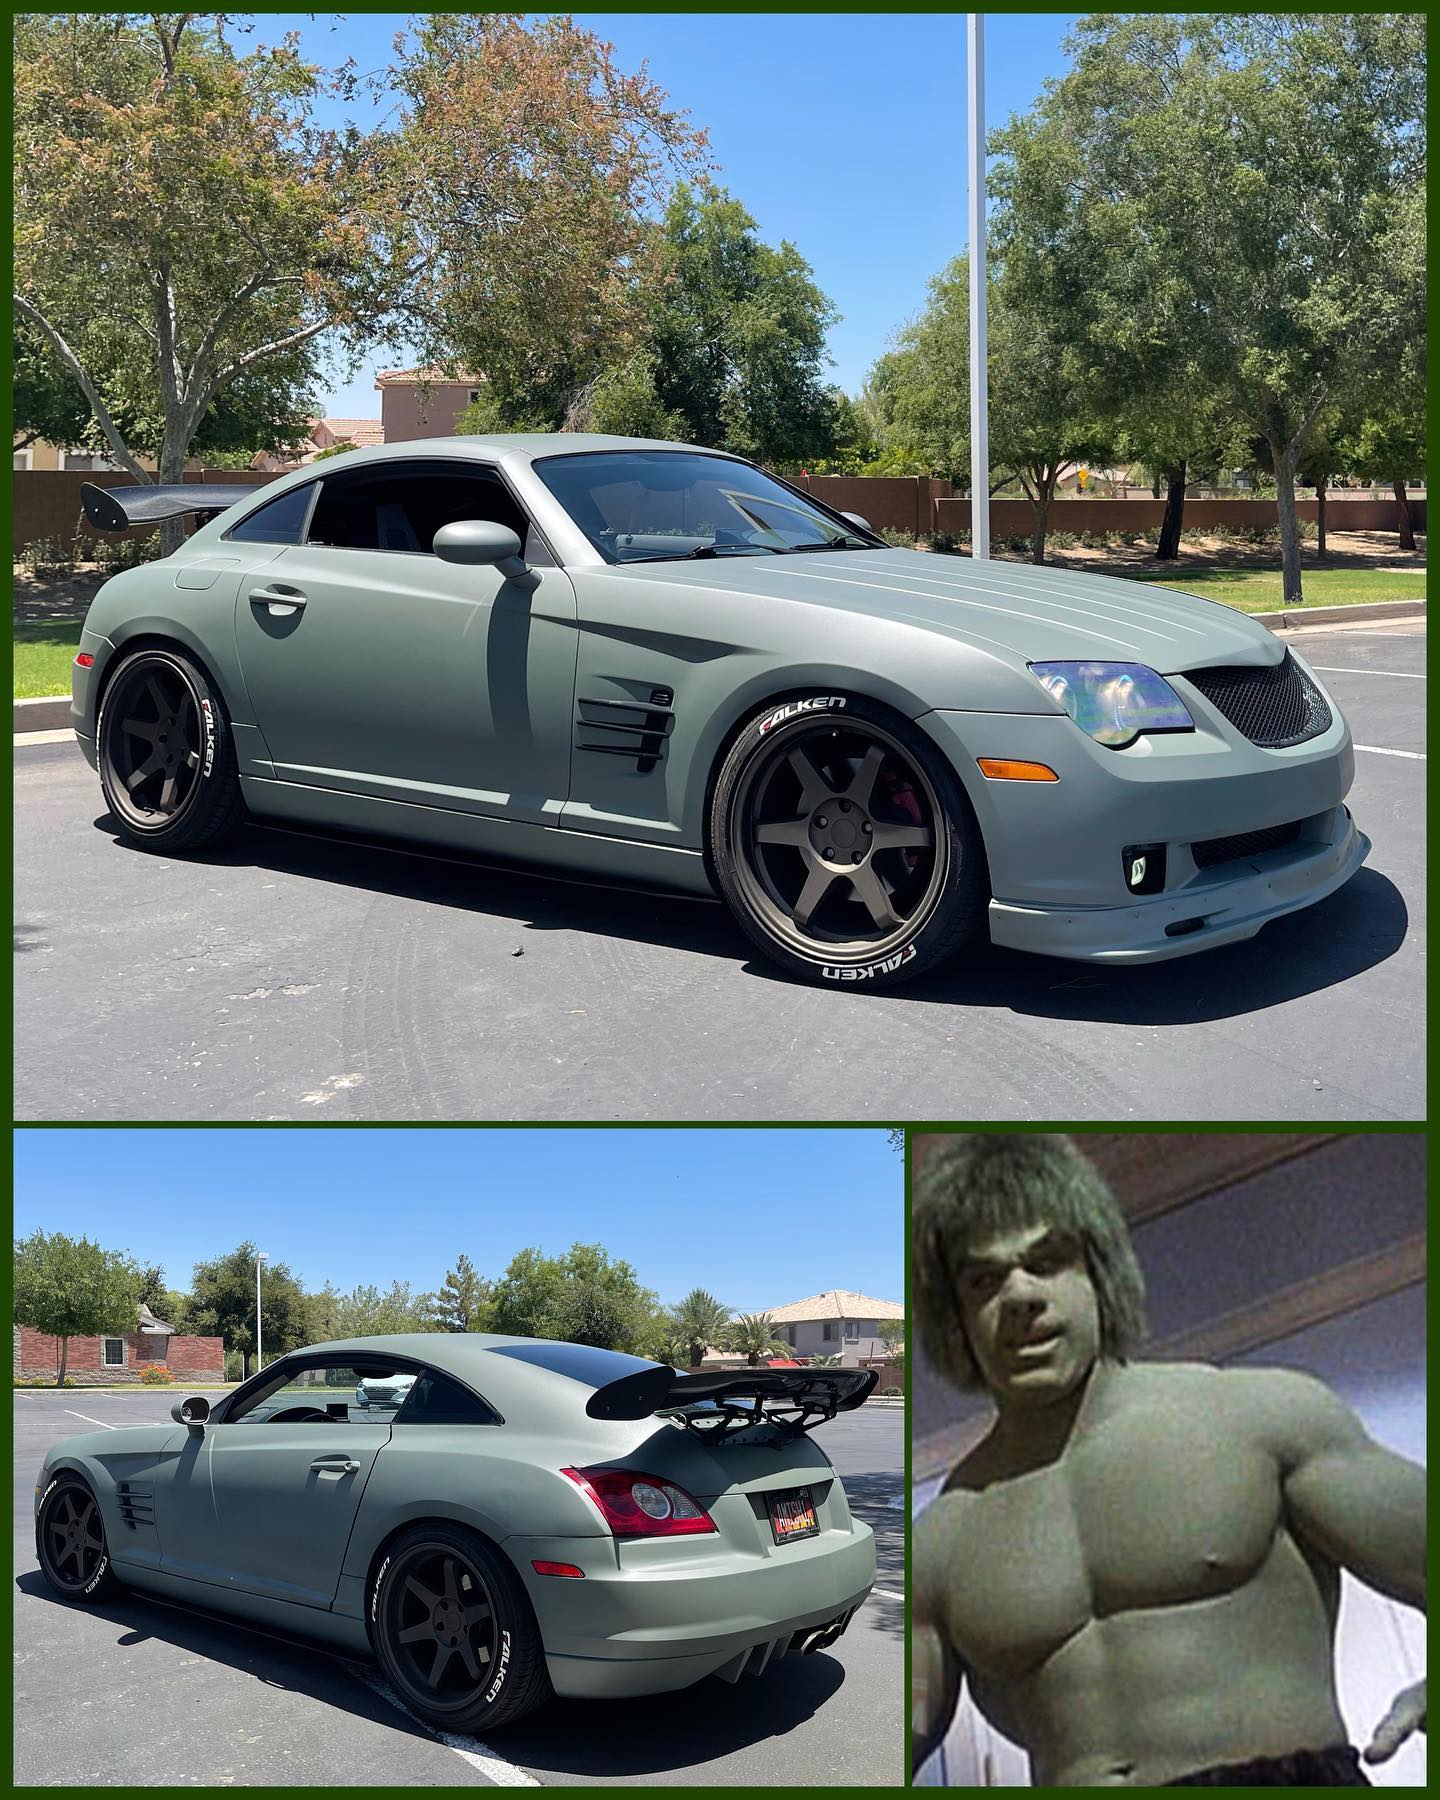 So I did a thing… maybe a few. Halos, demon eyes, side skirts and new color. #restorationcomplete #louferrigno #hulkgreen #dyc #az #projectcar #chryslercrossfire #hulksmash